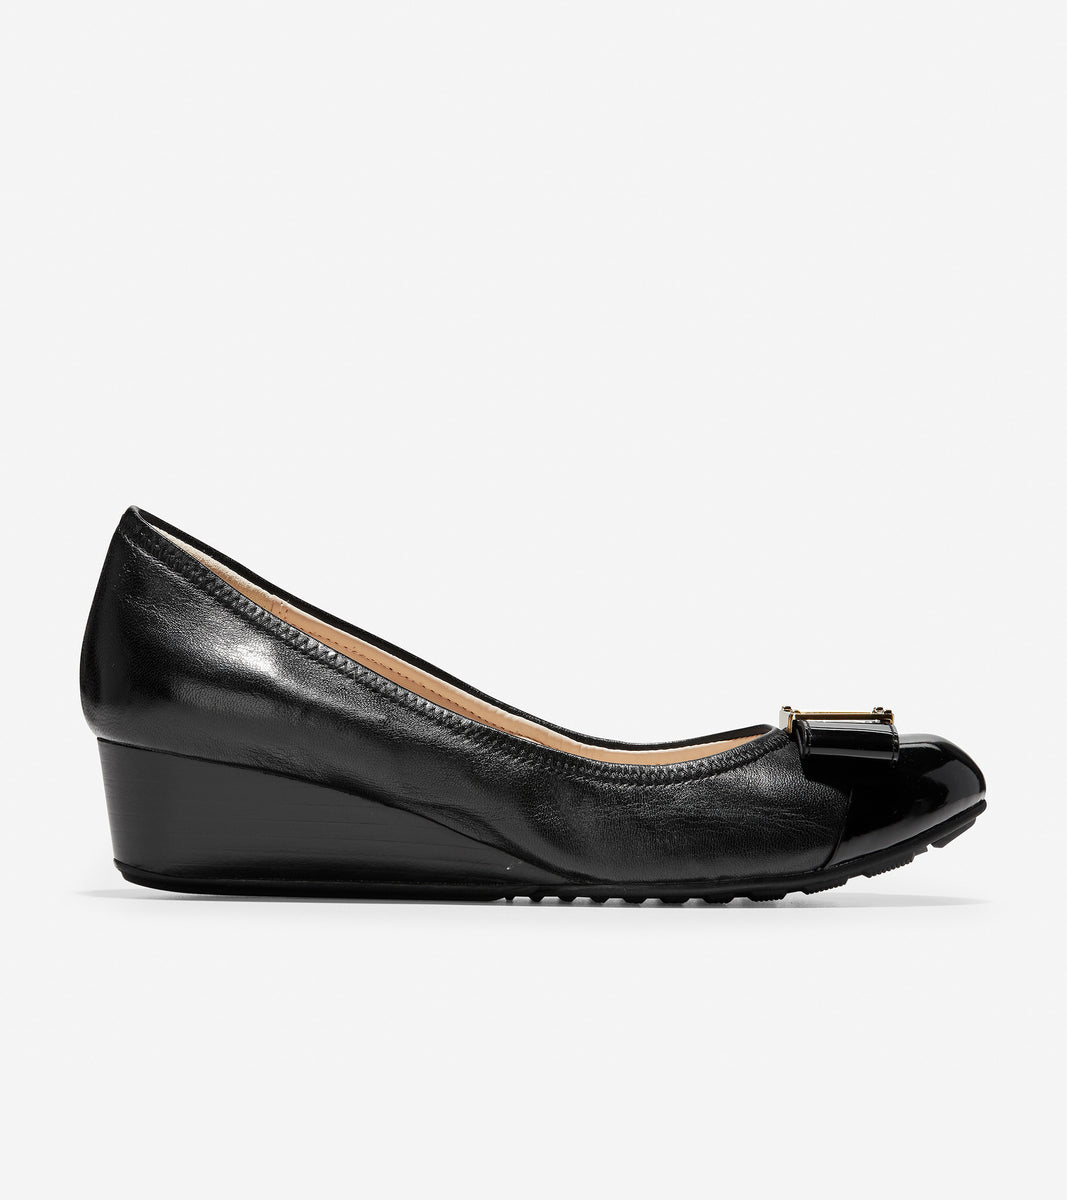 ColeHaan-Emory Bow Wedge-w09950-Black